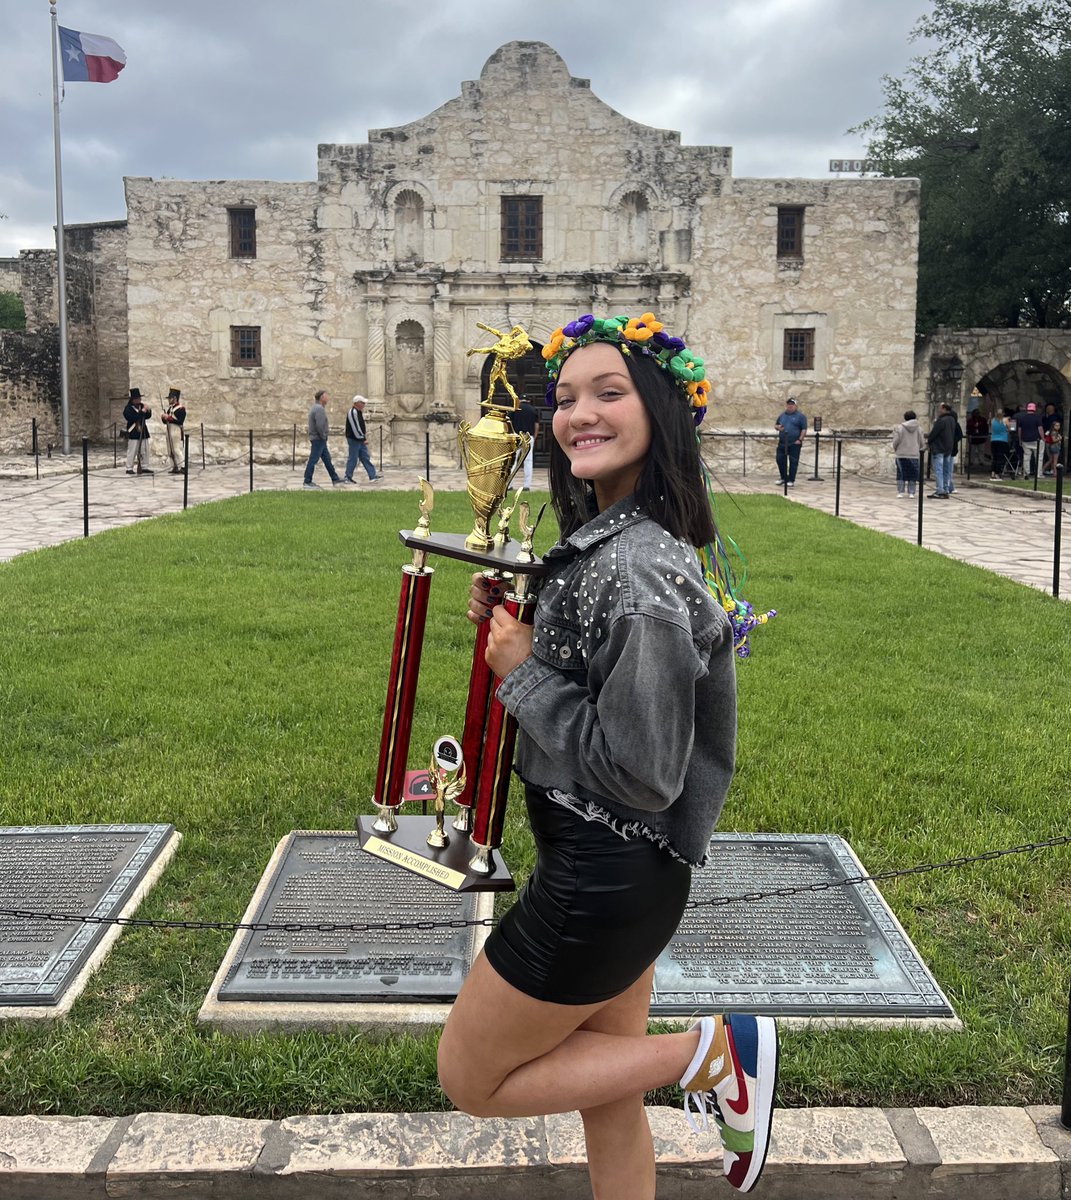 Decided to take the @MissionProWres Cup out to celebrate Fiesta and do some sightseeing in San Antonio! 🏆 🪅